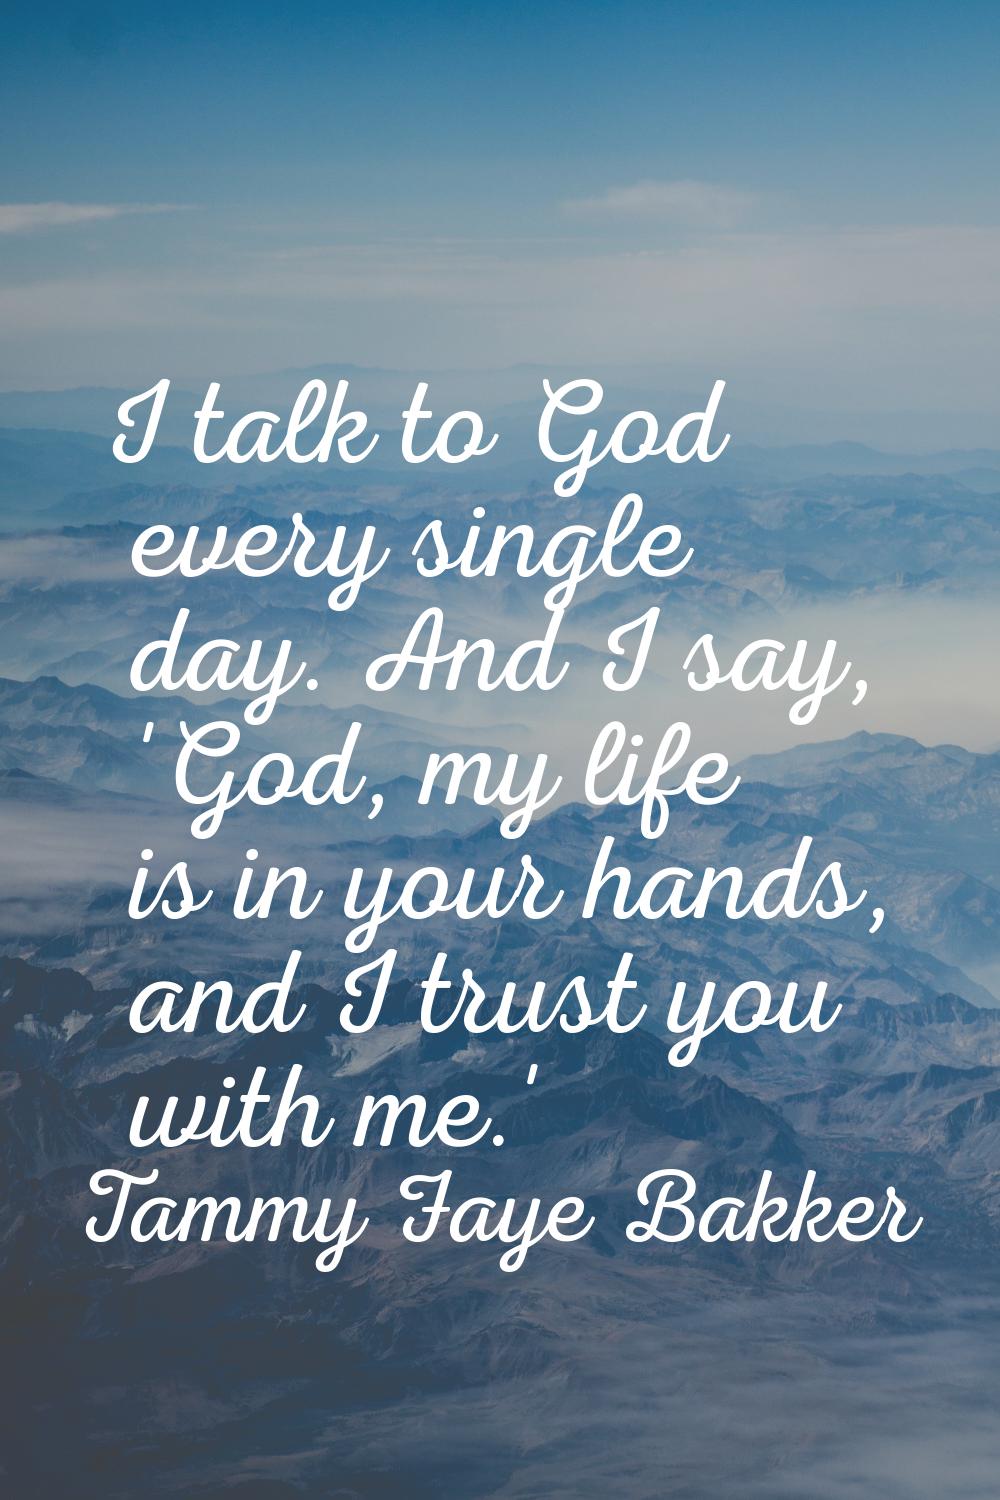 I talk to God every single day. And I say, 'God, my life is in your hands, and I trust you with me.